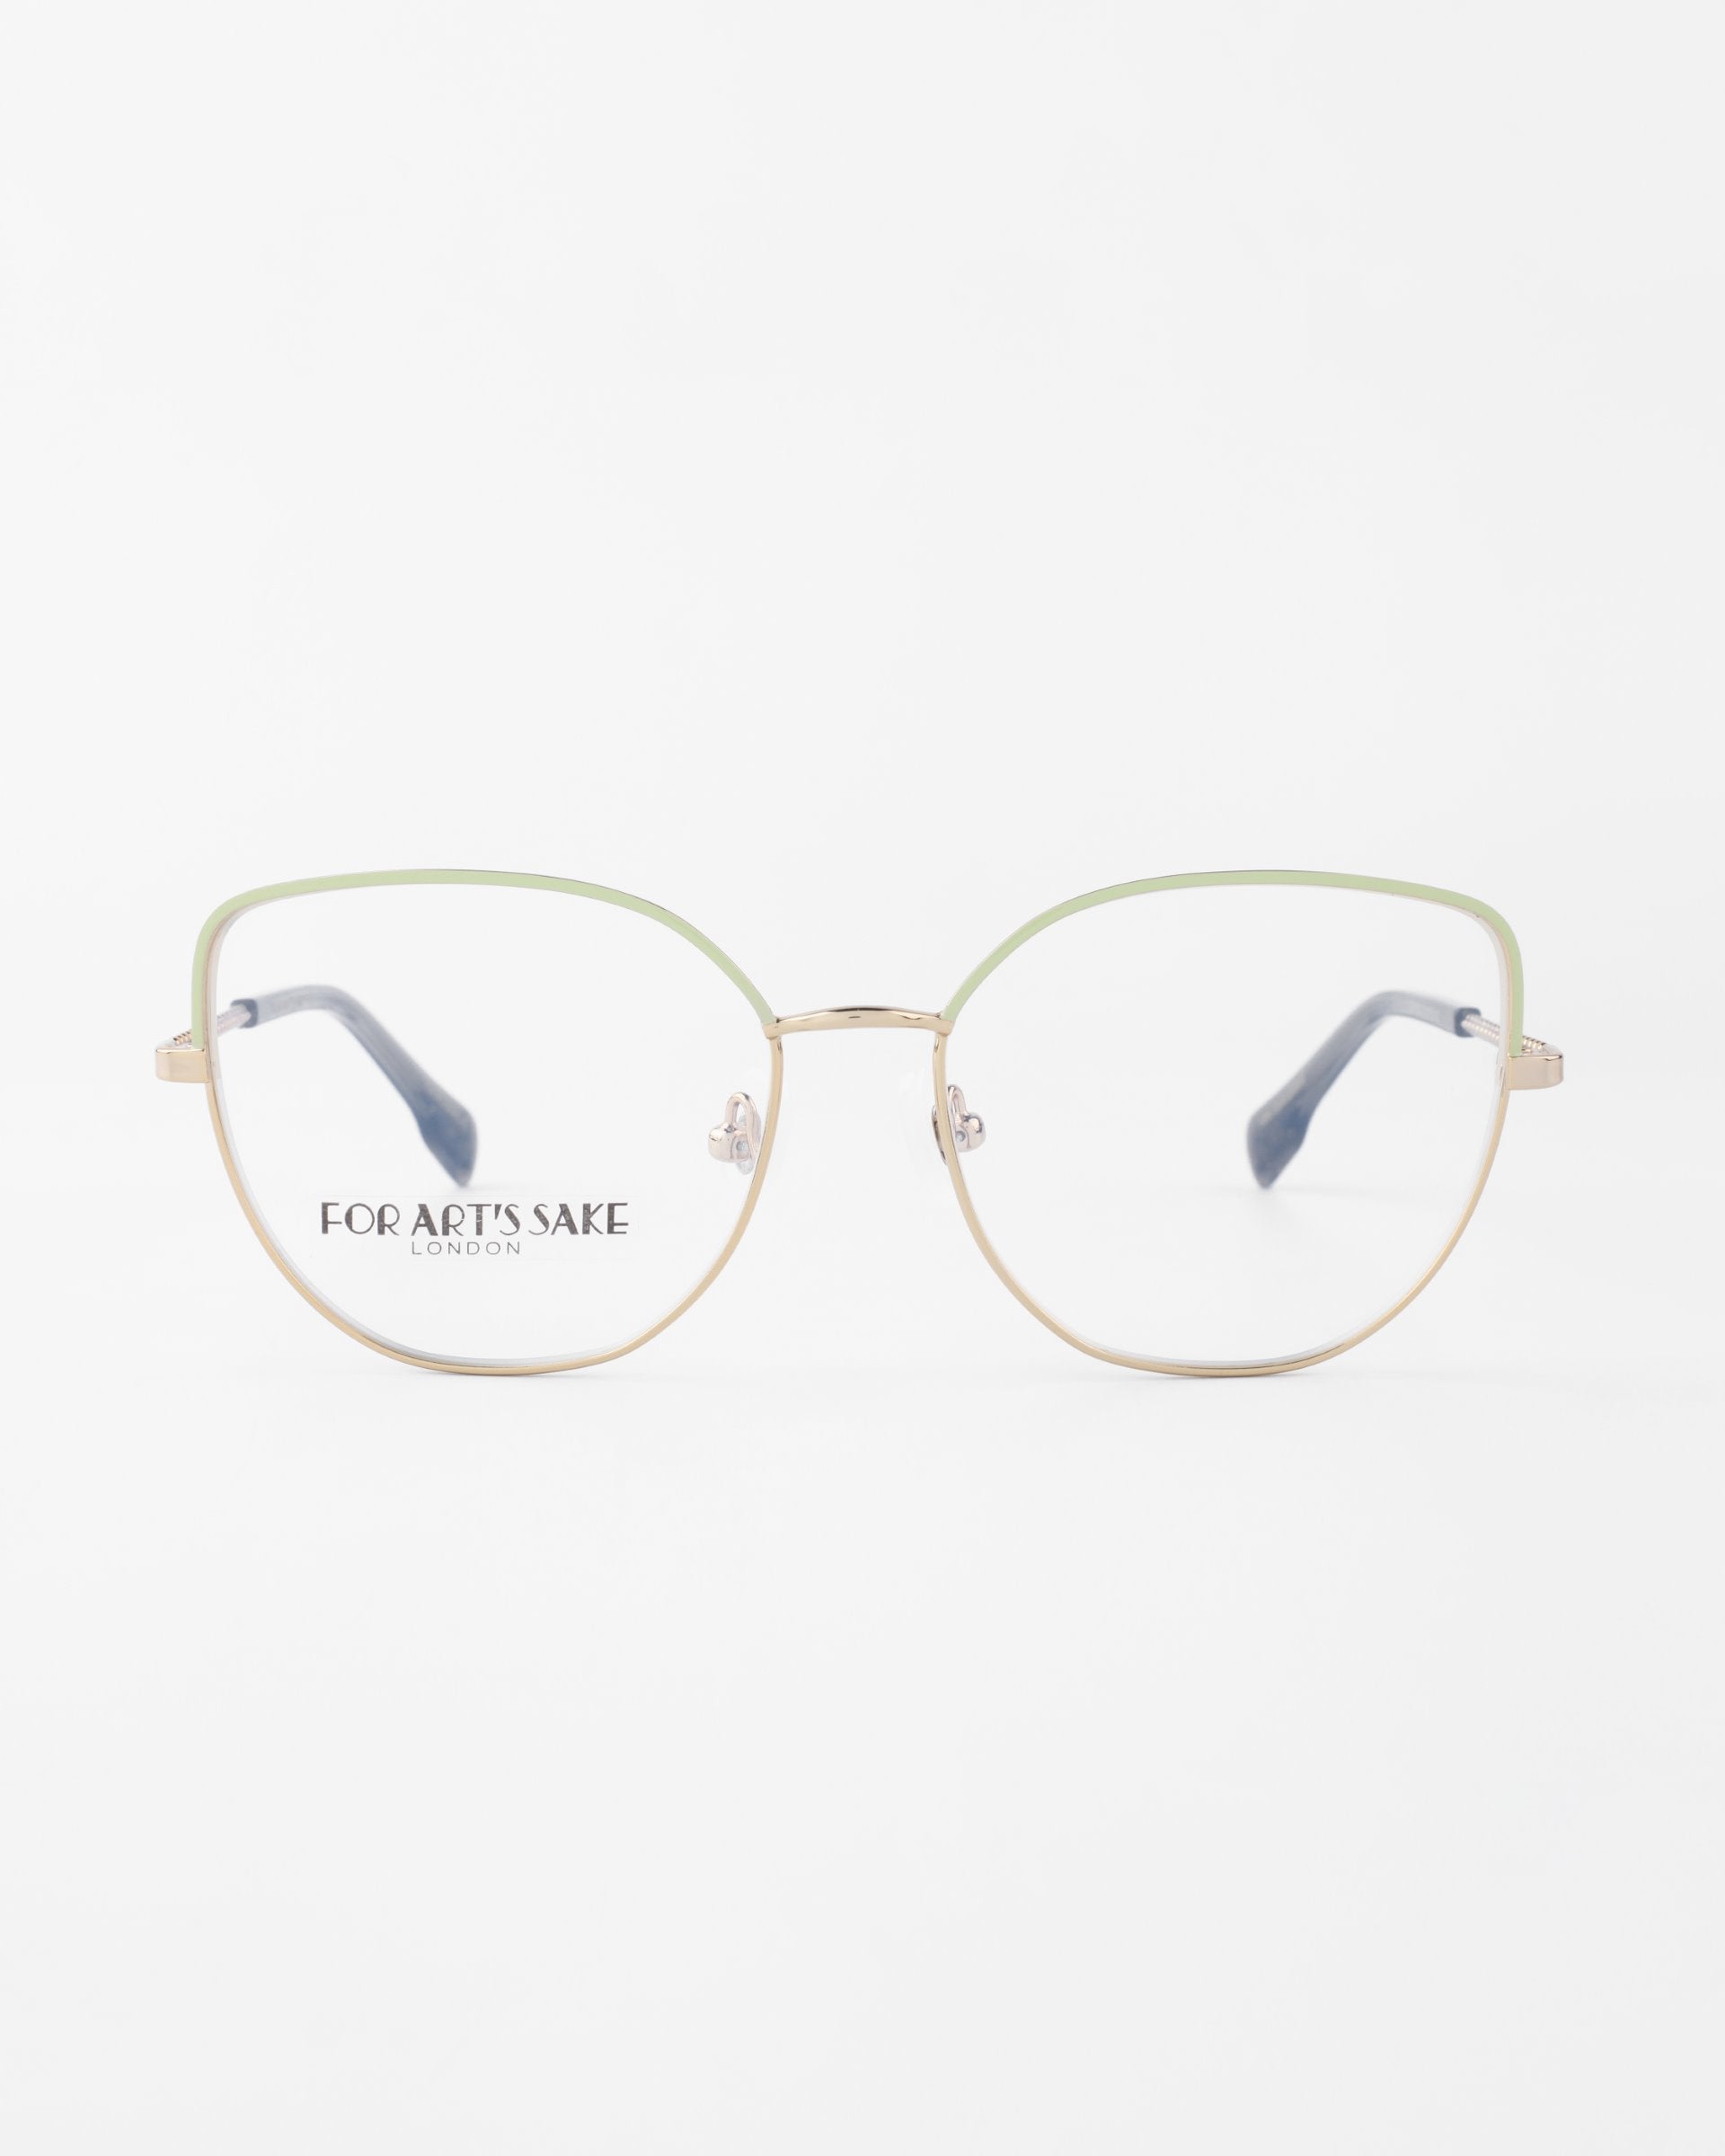 A pair of **Ophelia** eyeglasses with thin, gold metal frames and green accents around the lenses. Featuring a subtle cat-eye silhouette, the clear lenses carry the brand &quot;**For Art&#39;s Sake®**&quot; on the inside of the left lens. The glasses are set against a plain white background.